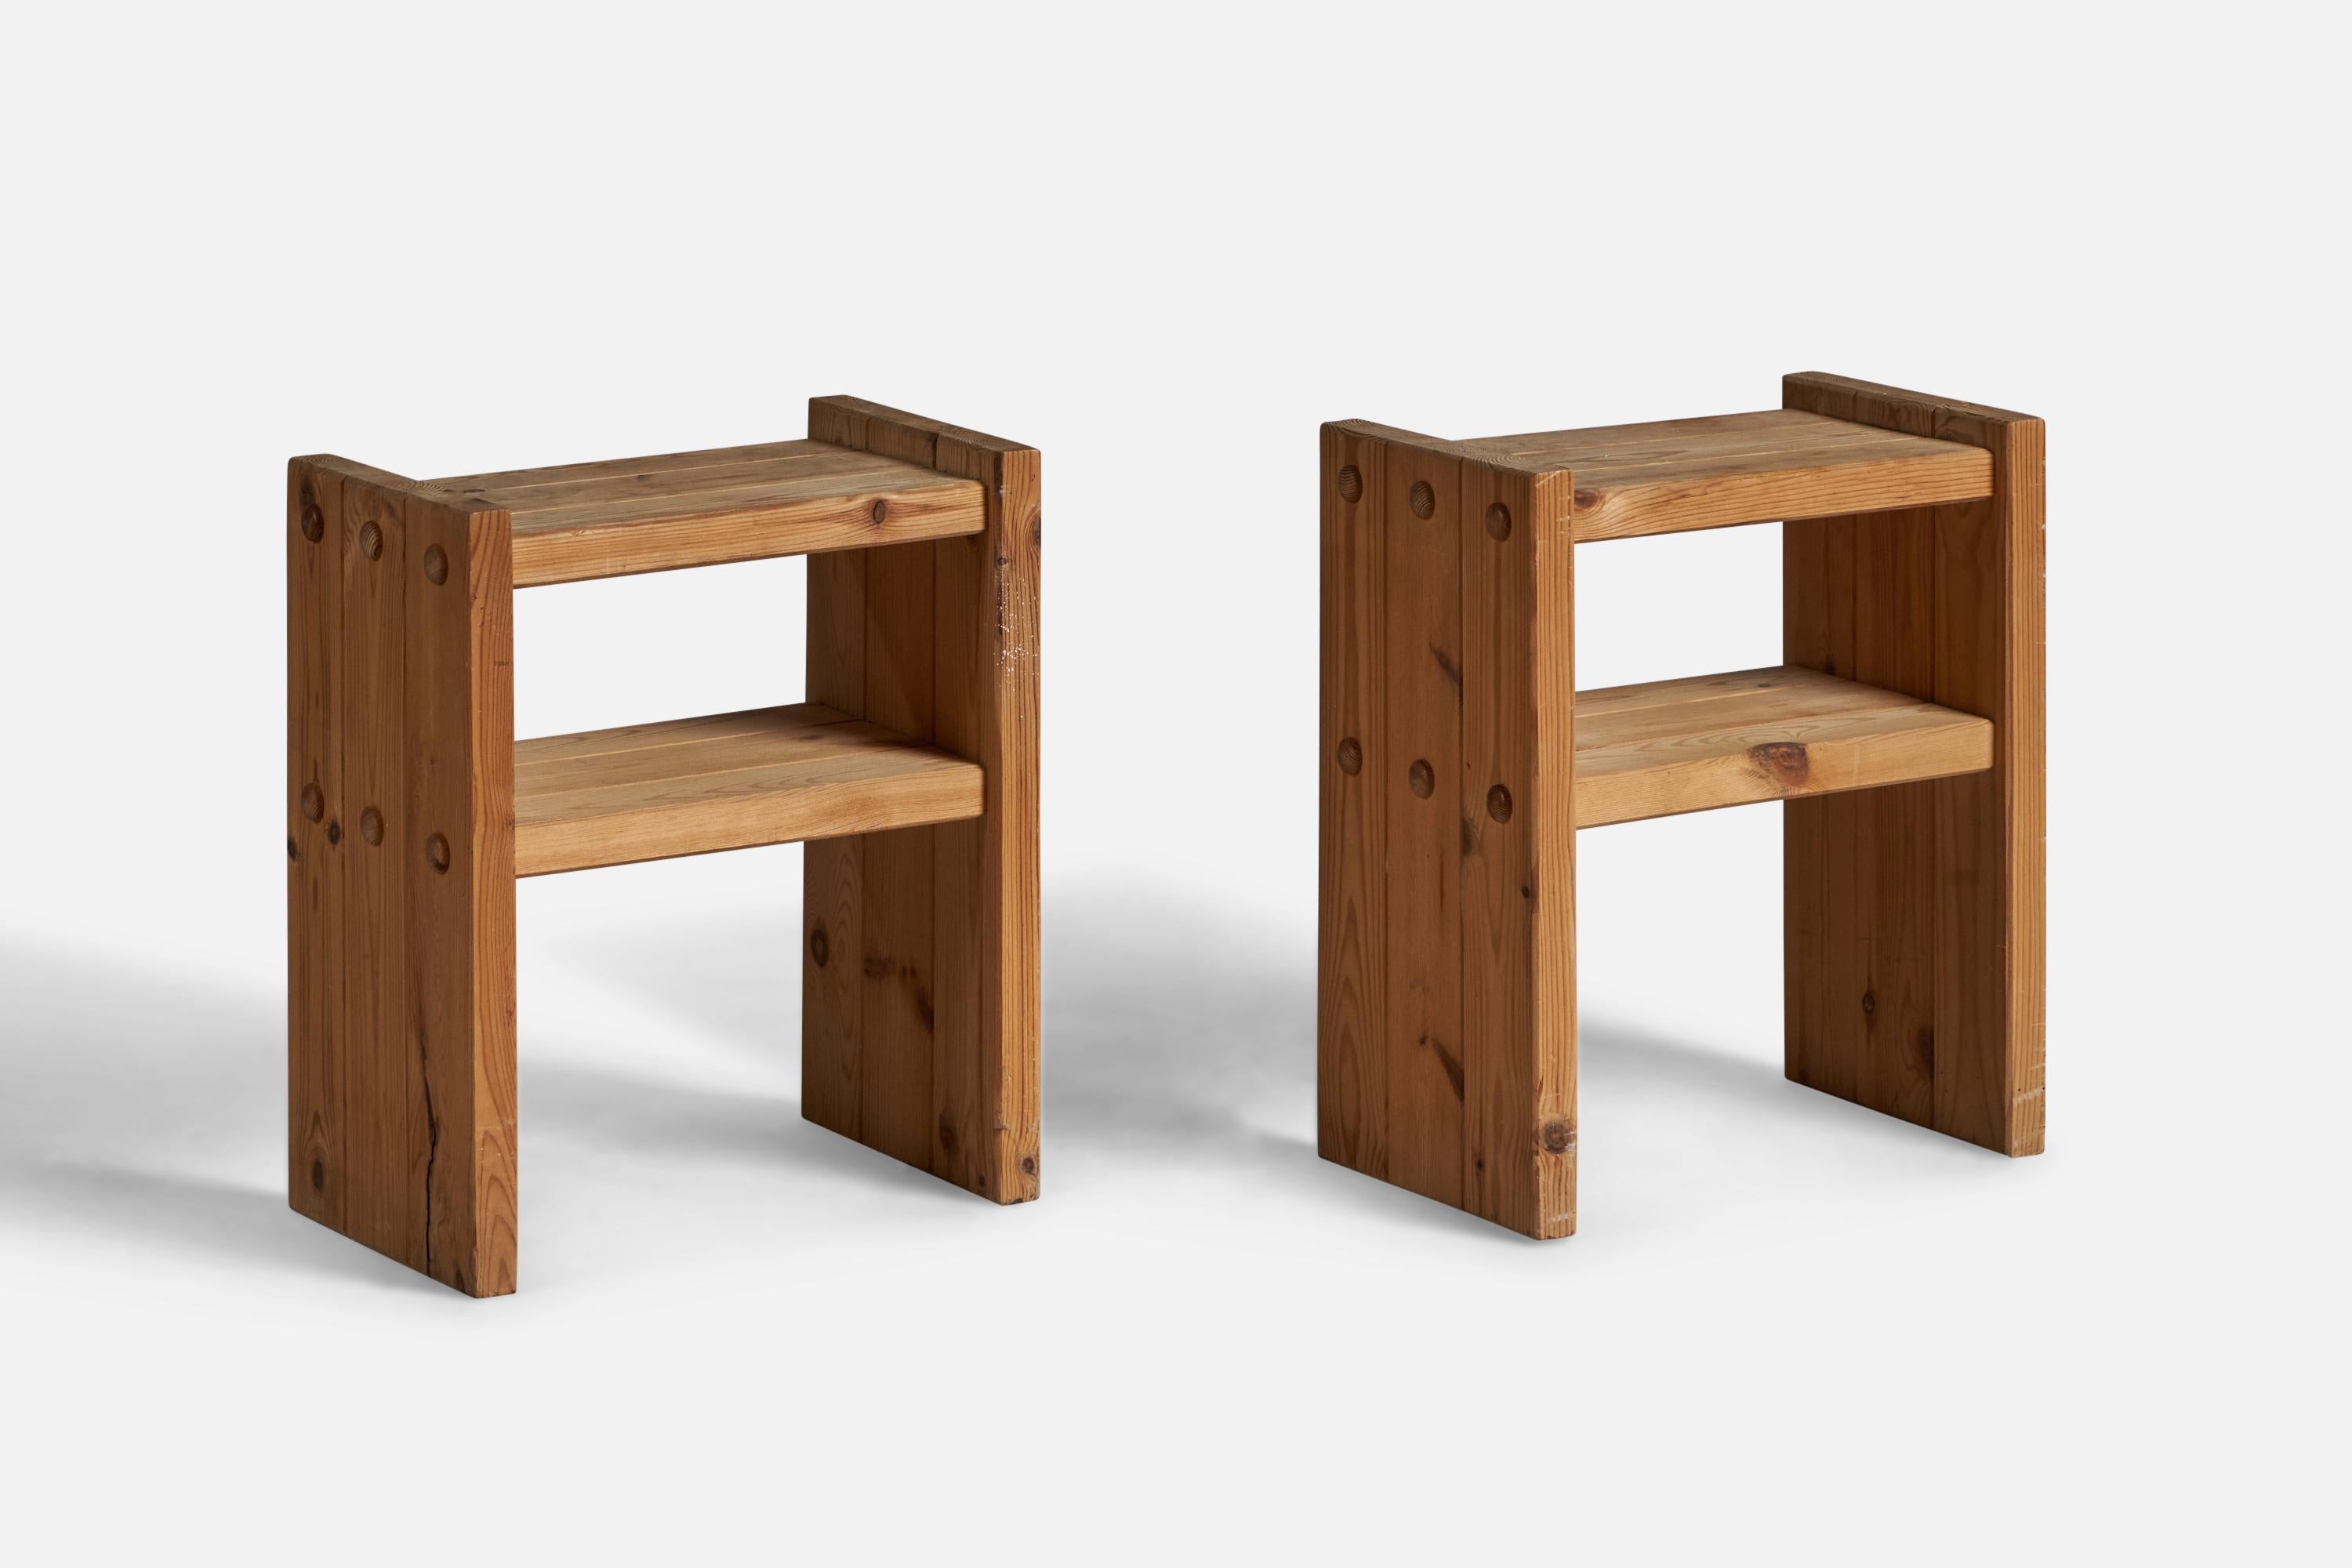 A pair of solid pine nightstands or bedside tables, designed and produced in Sweden, 1970s.